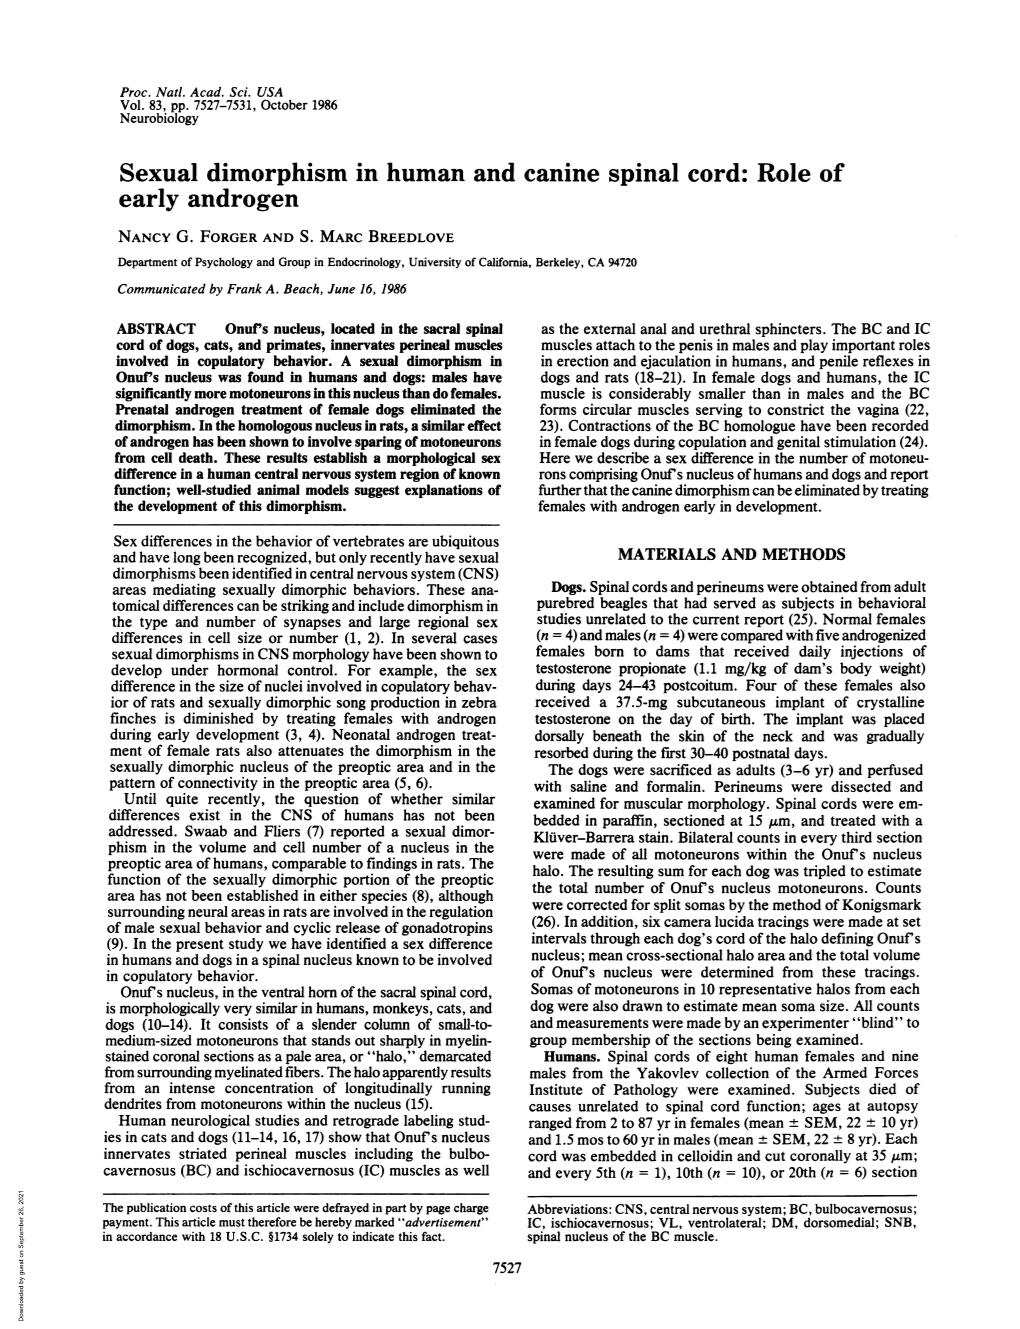 Sexual Dimorphism in Human and Canine Spinal Cord: Role of Early Androgen NANCY G